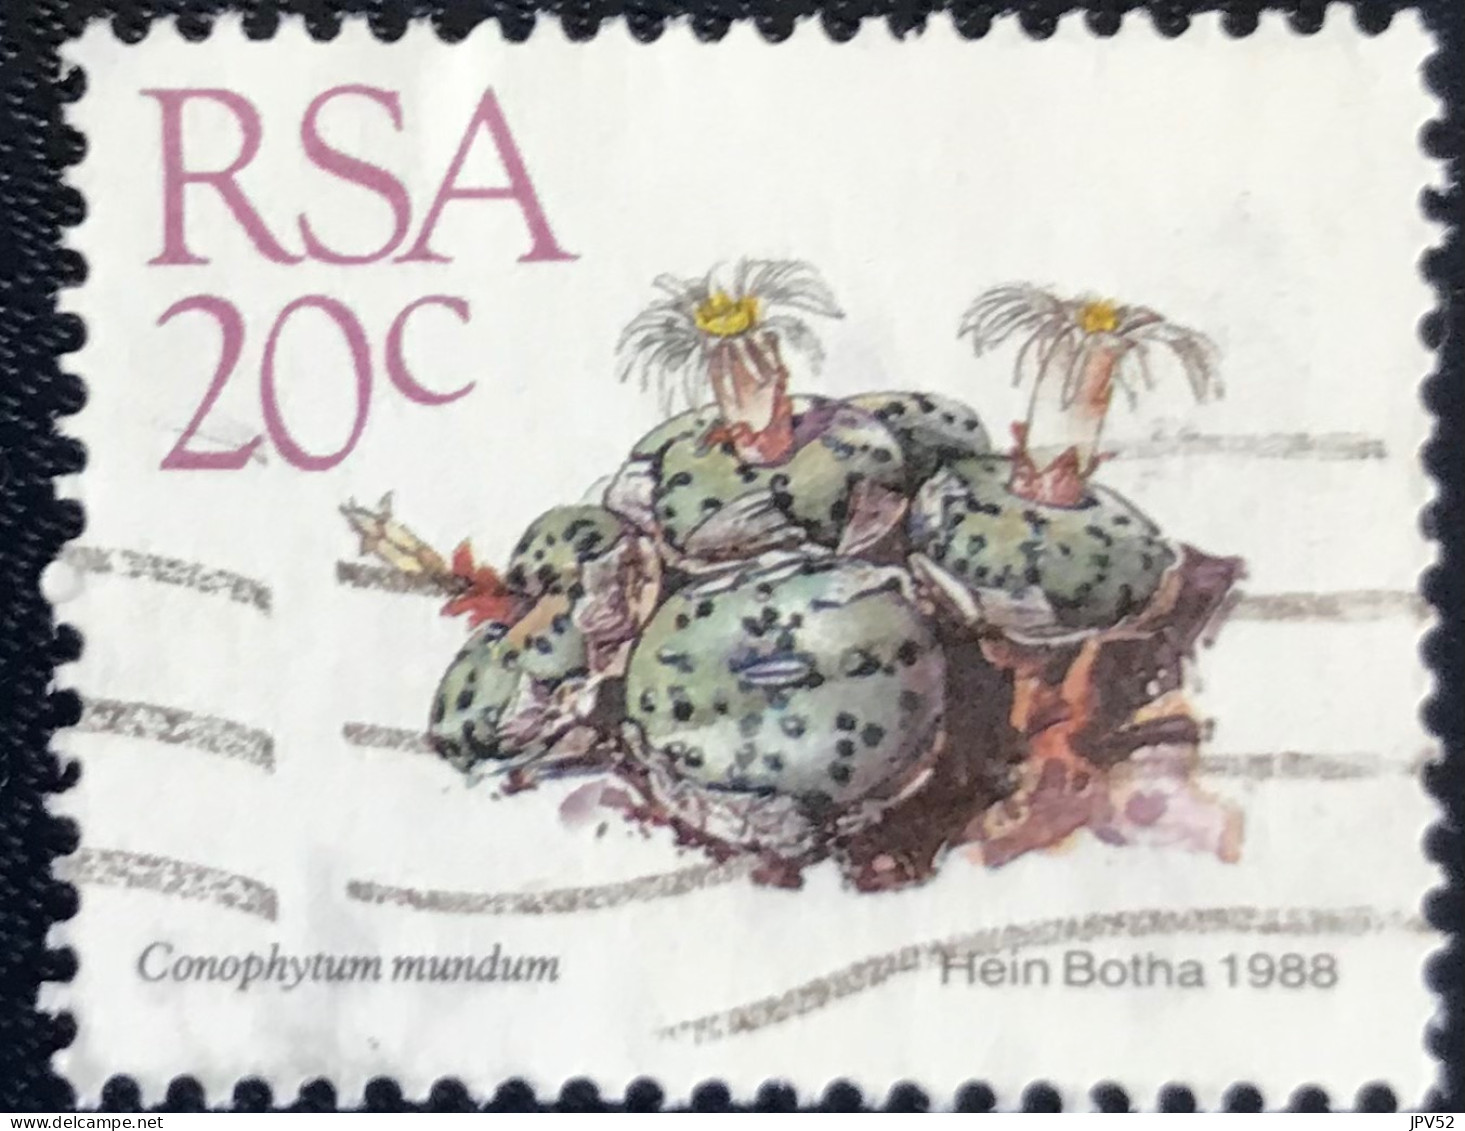 RSA - South Africa - Suid-Afrika  - C18/6 - 1988 - (°)used - Michel 749 - Vetplanten - Used Stamps